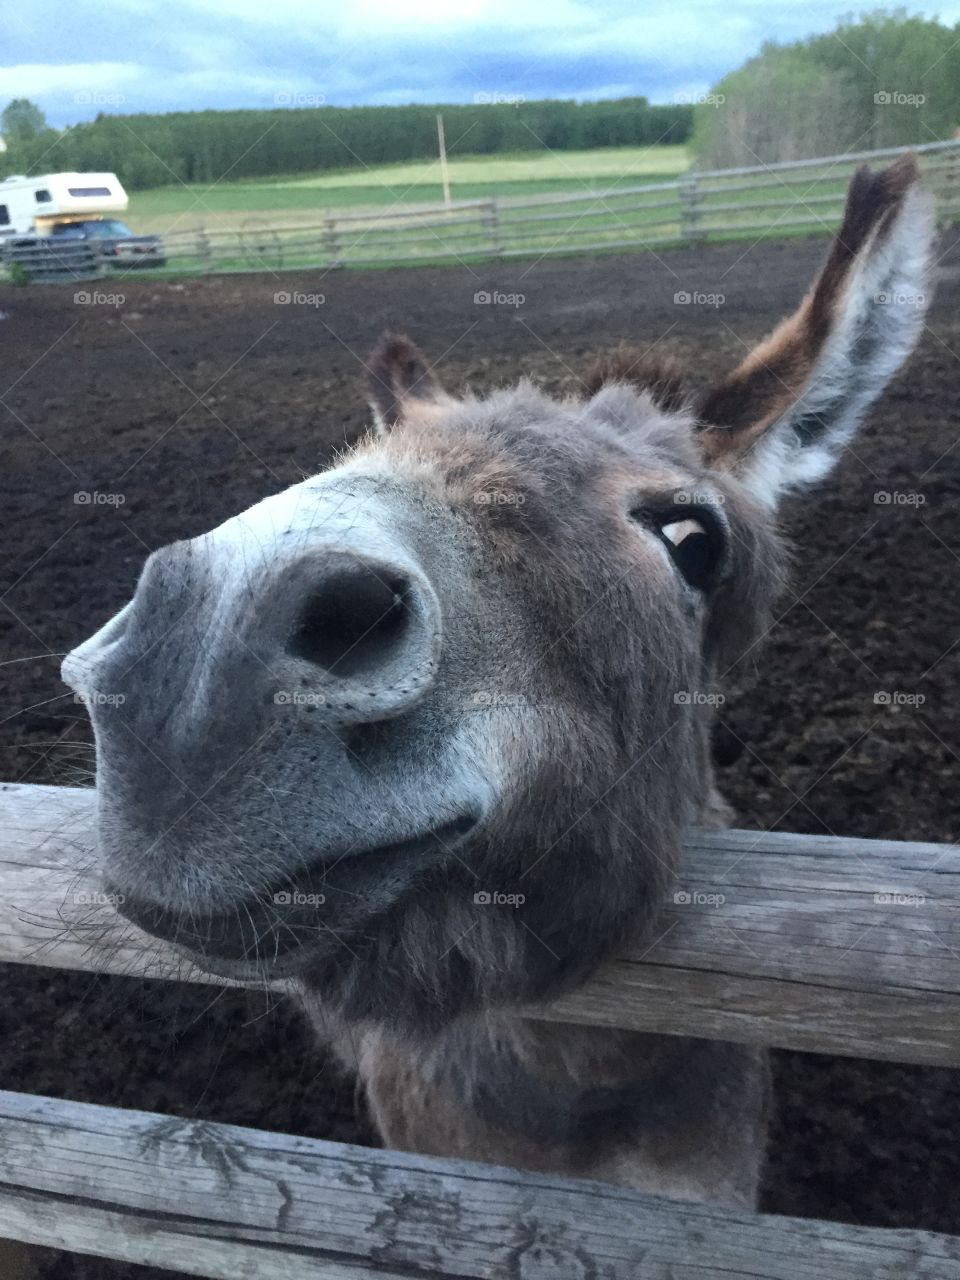 Stare down from Bobo the Donkey 